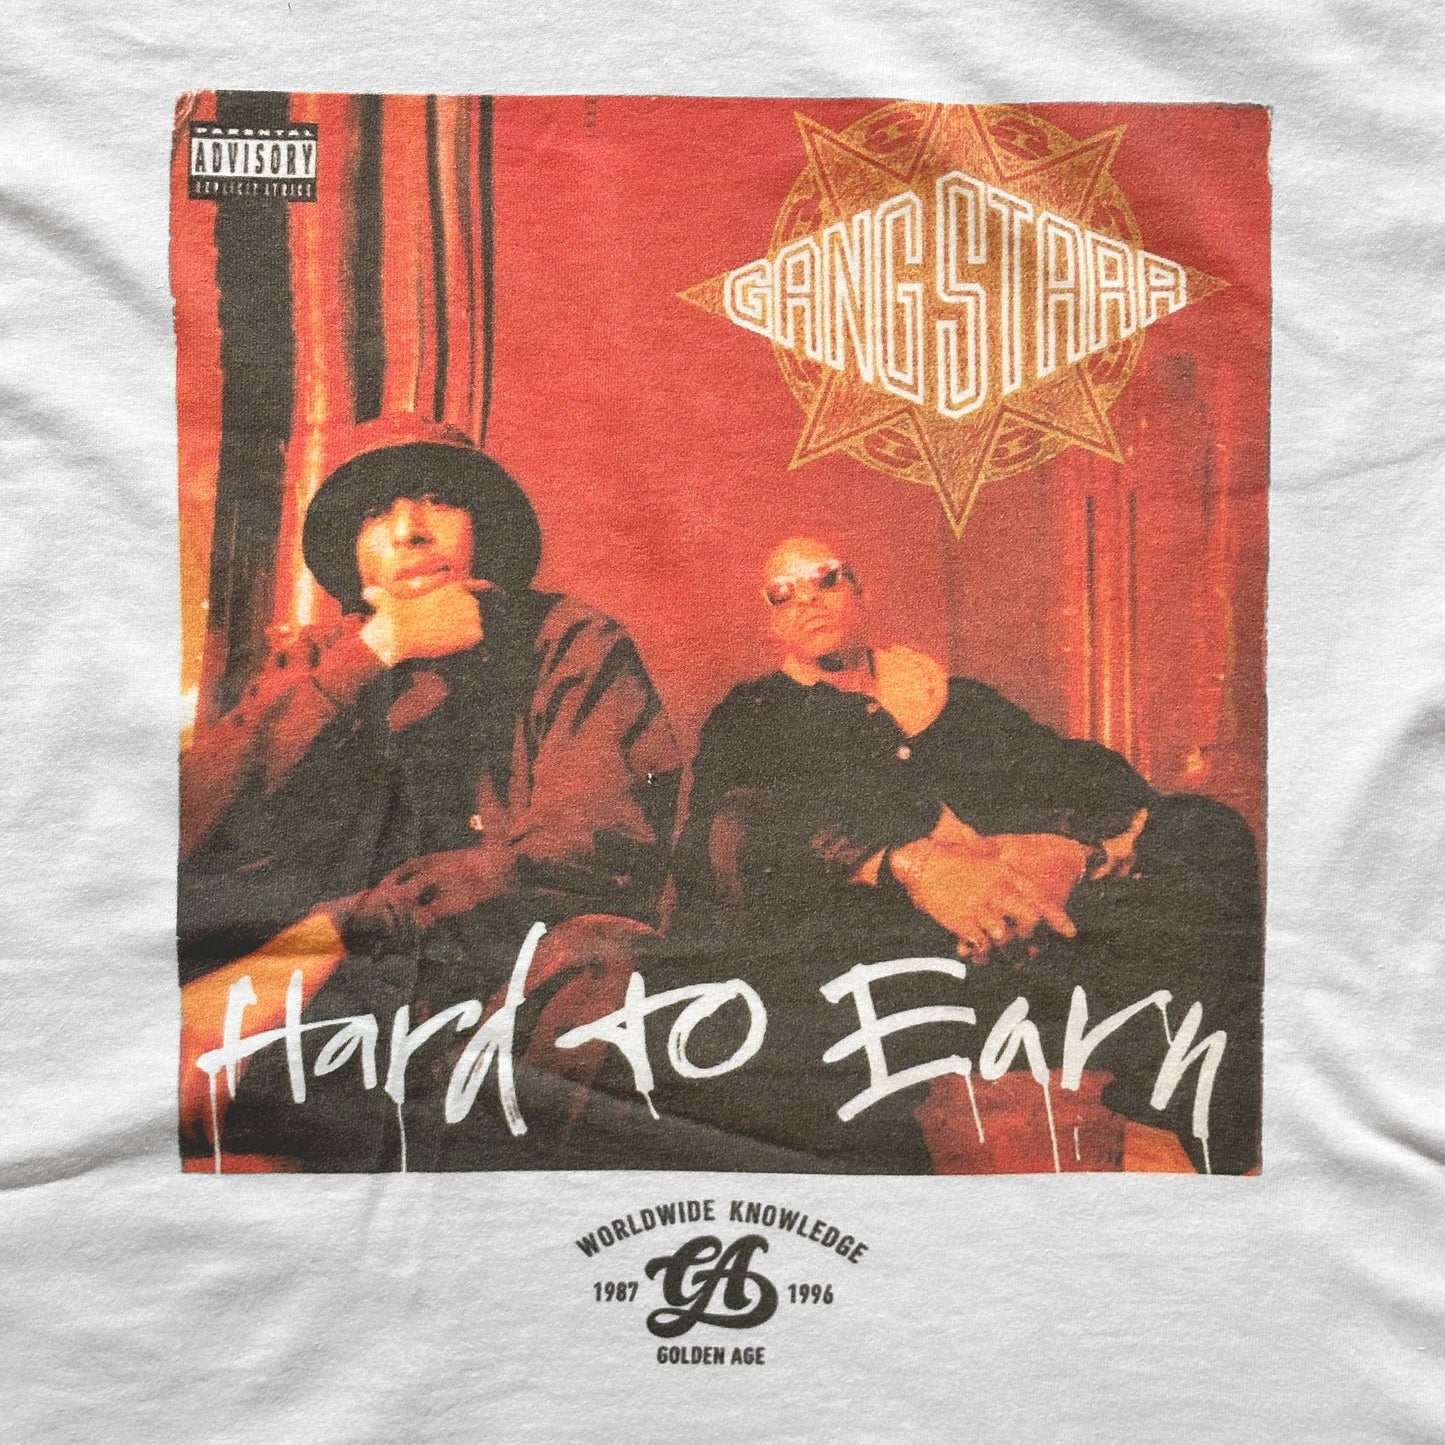 Golden Age Hard To Earn Tee White